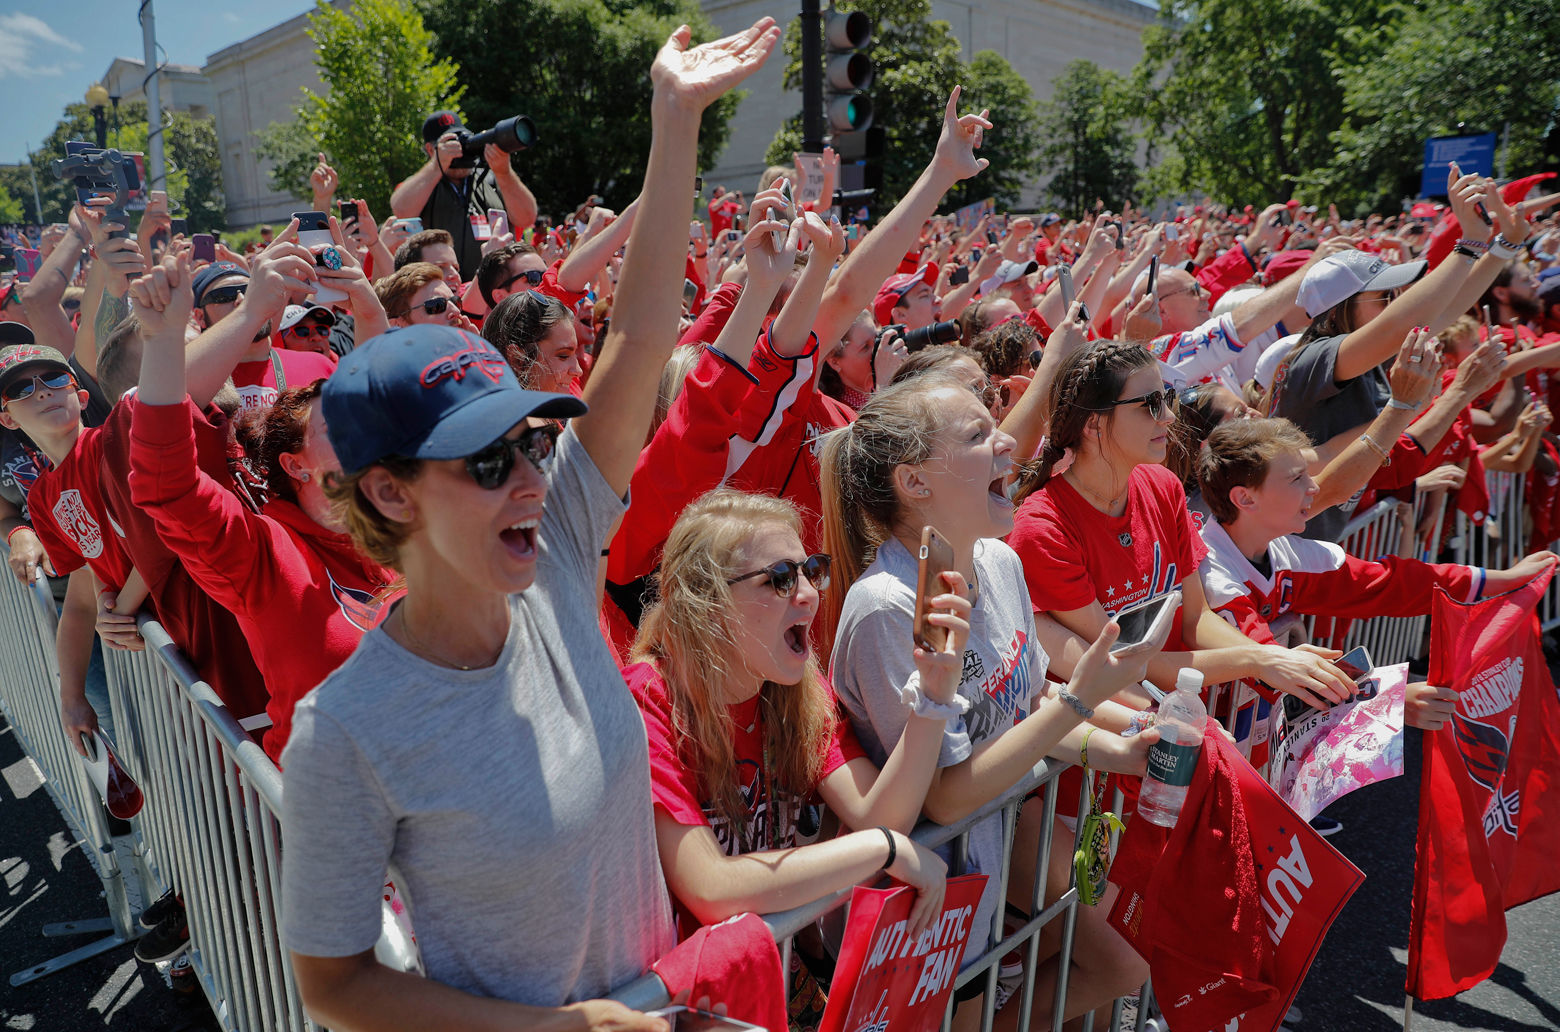 Fans wave as they watch the parade. (AP Photo/Pablo Martinez Monsivais)